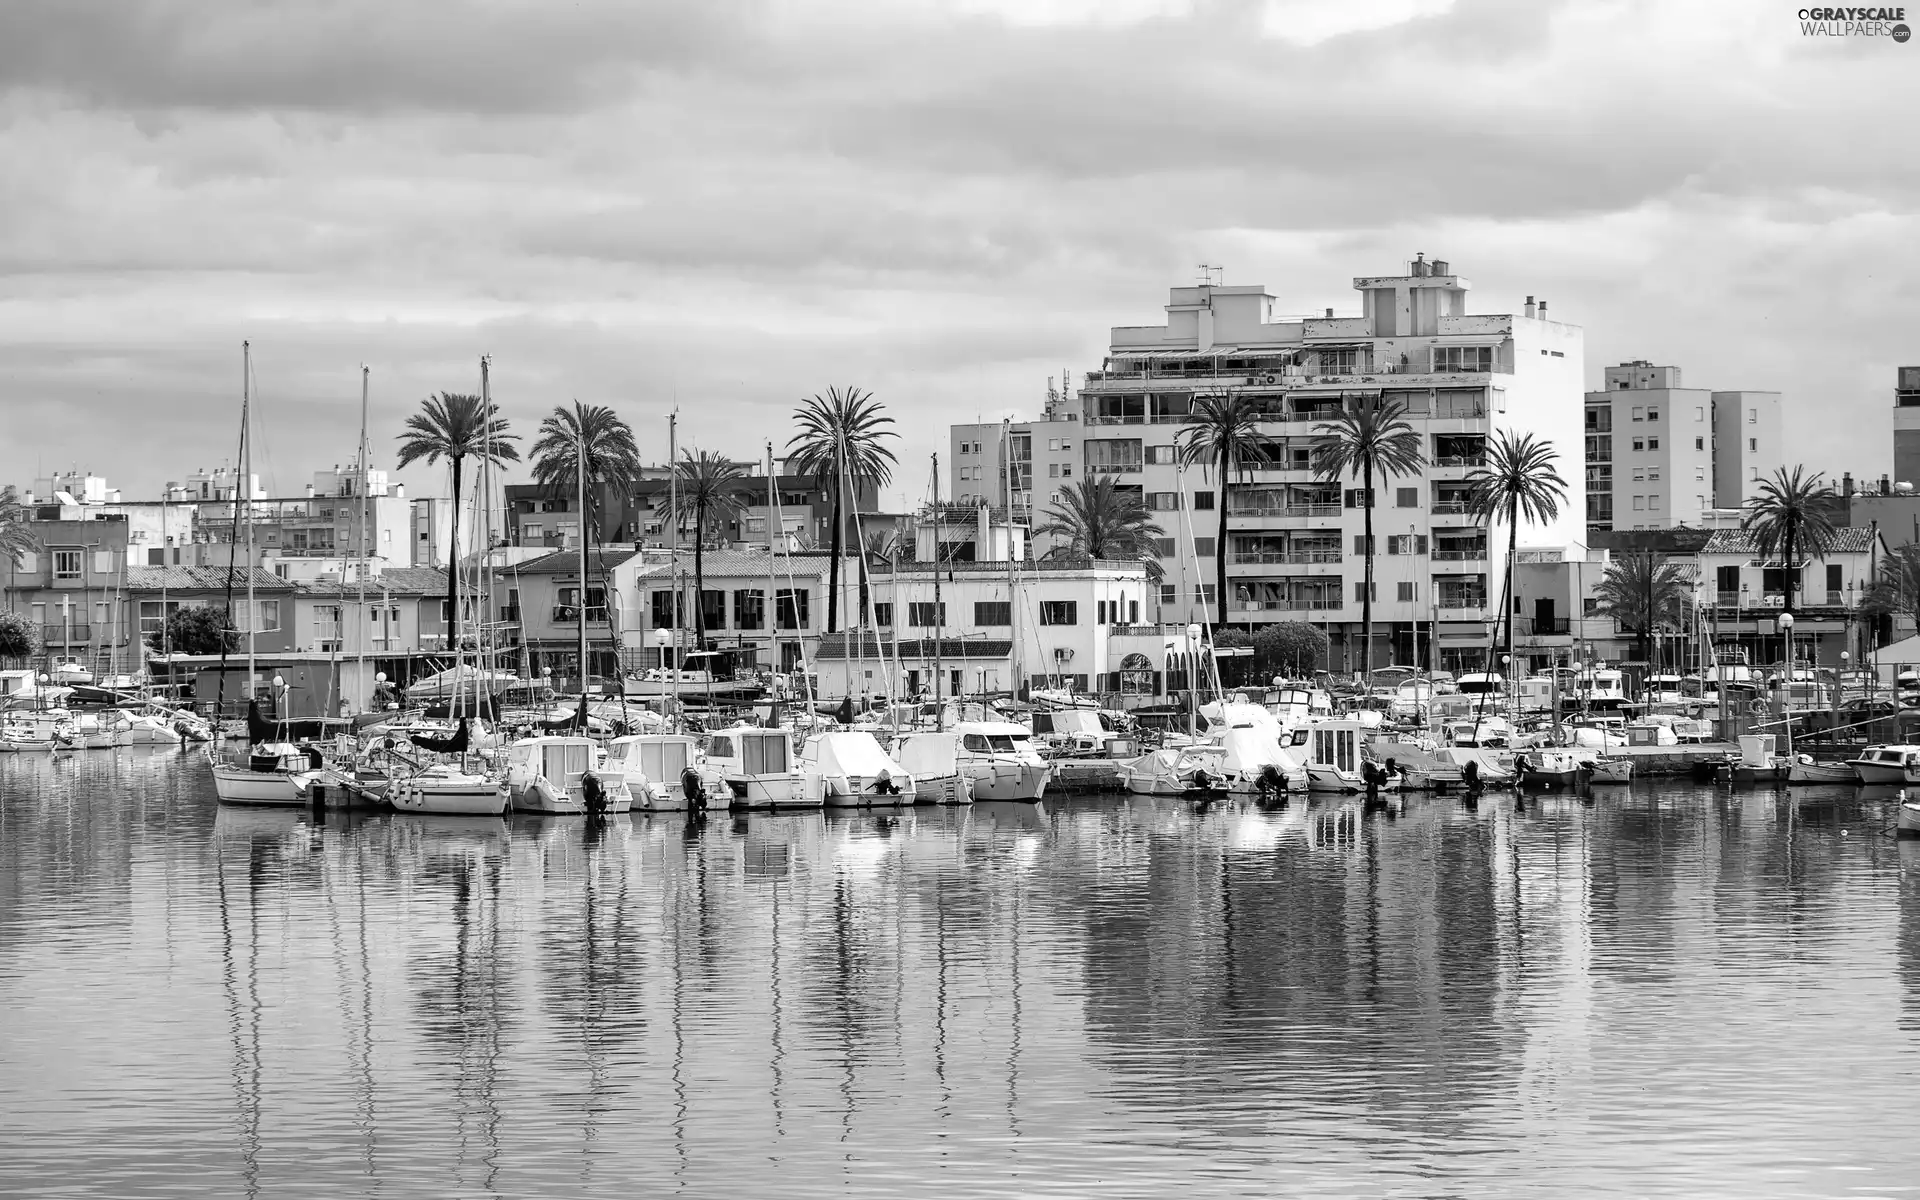 Harbour, Yachts, buildings, boats